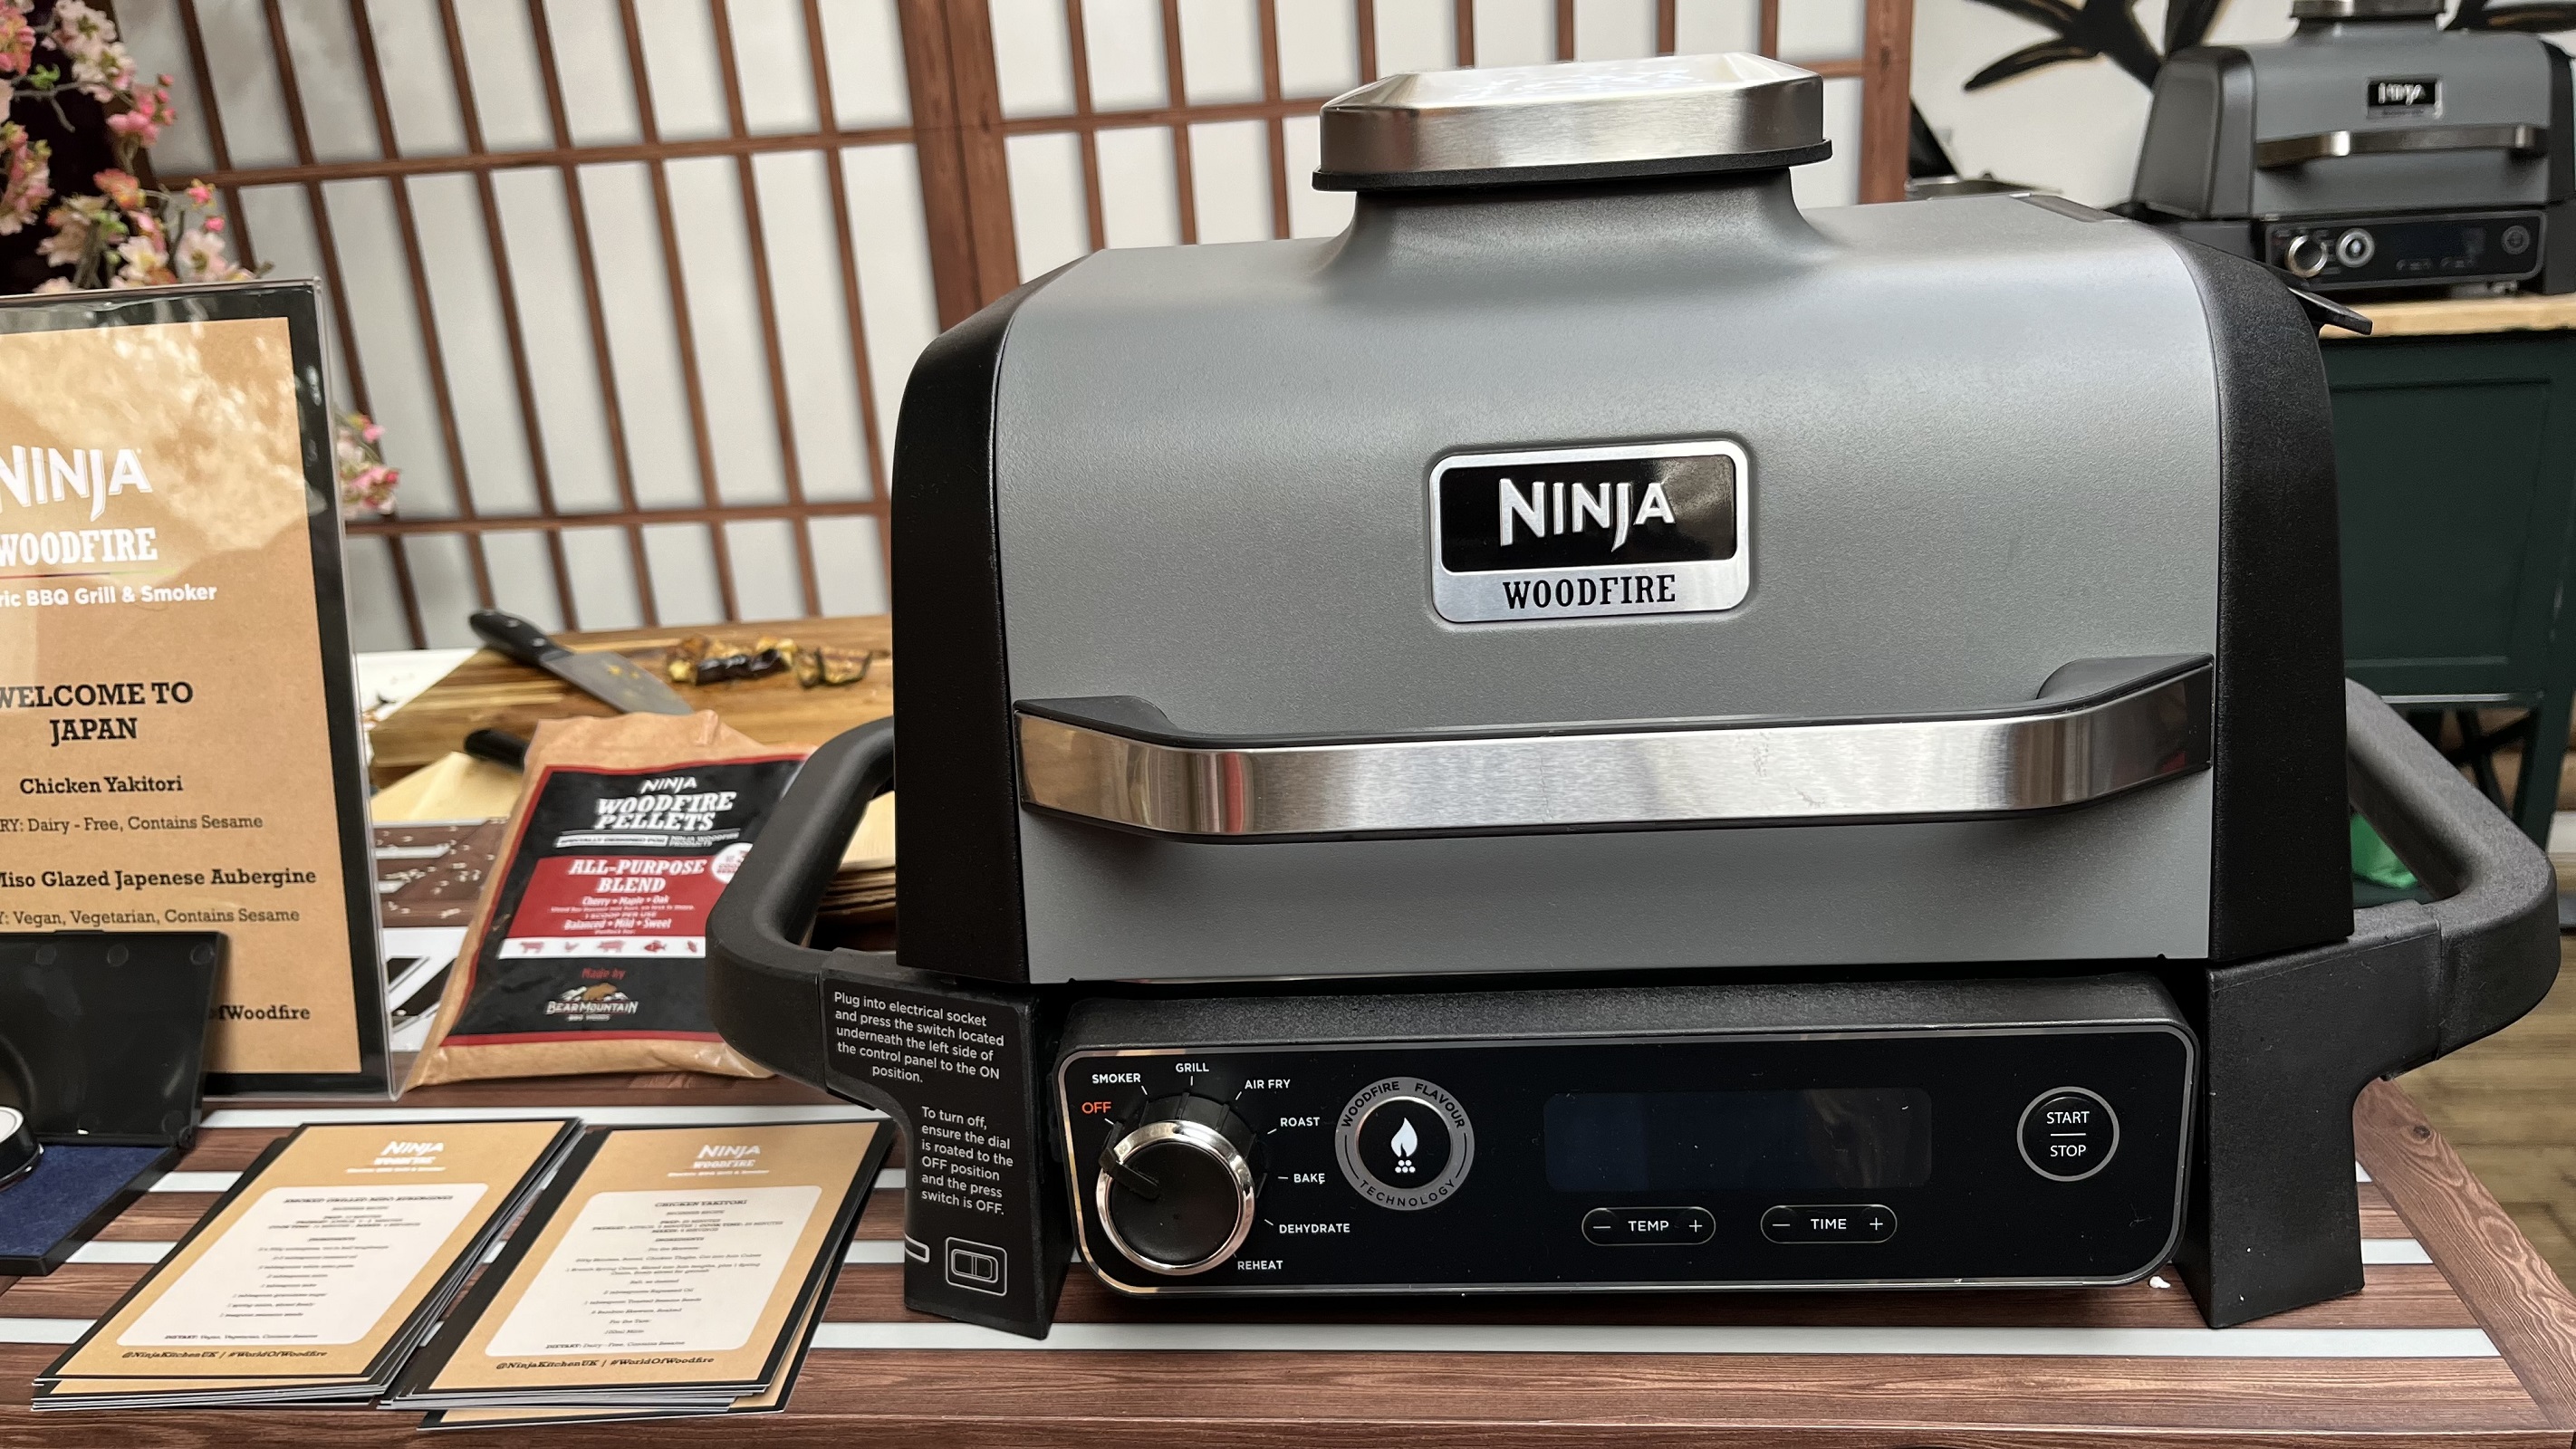 The Ninja Woodfire is like an outdoor air fryer, and I've seen